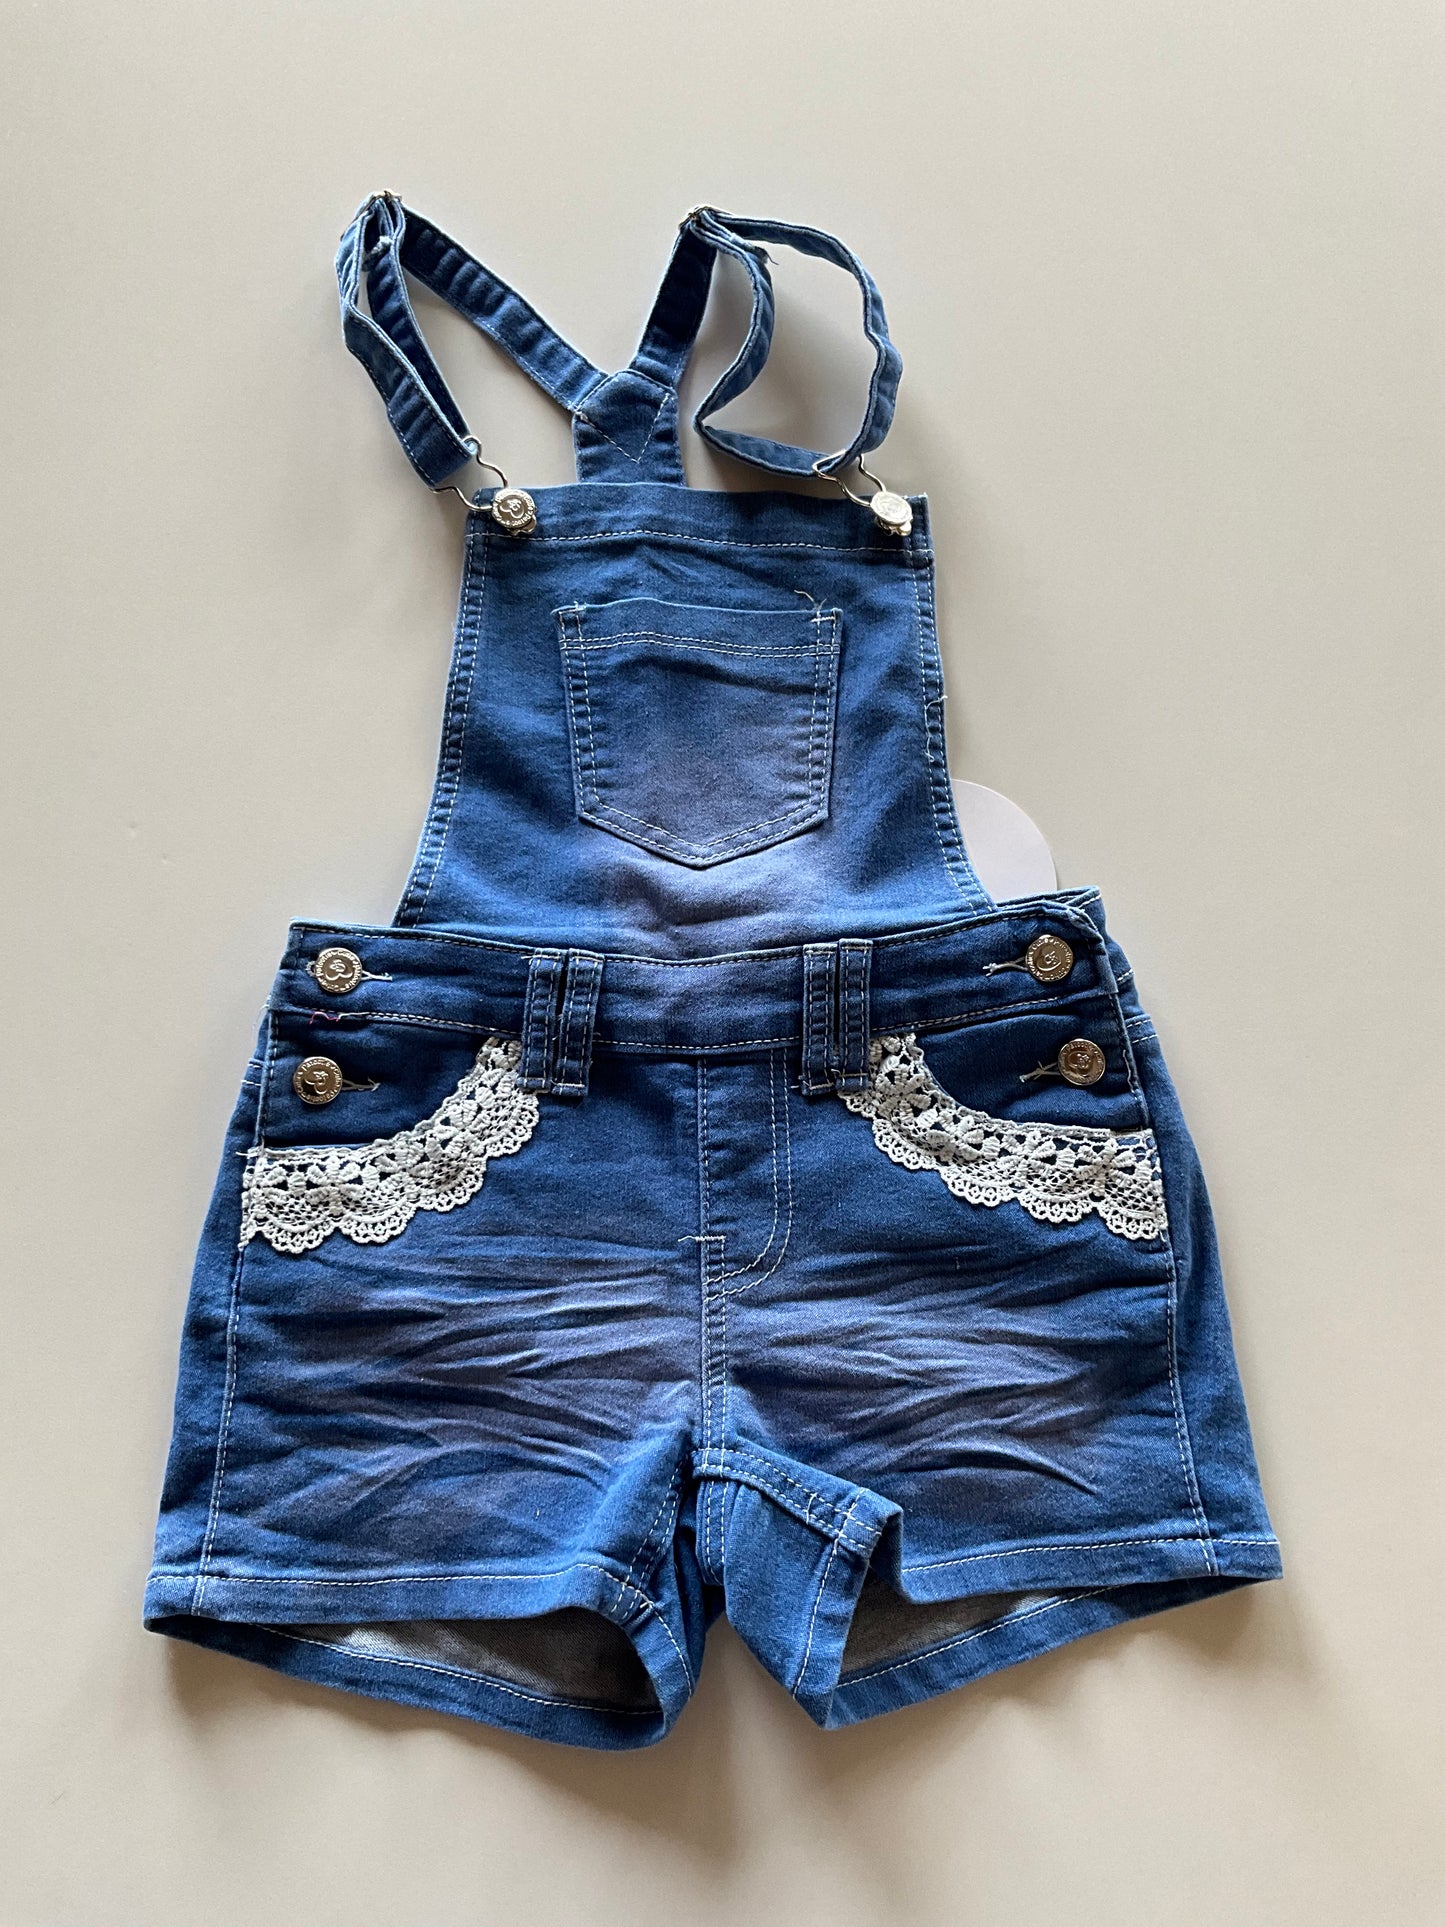 BNWT Lace Applique Denim Overall Shorts